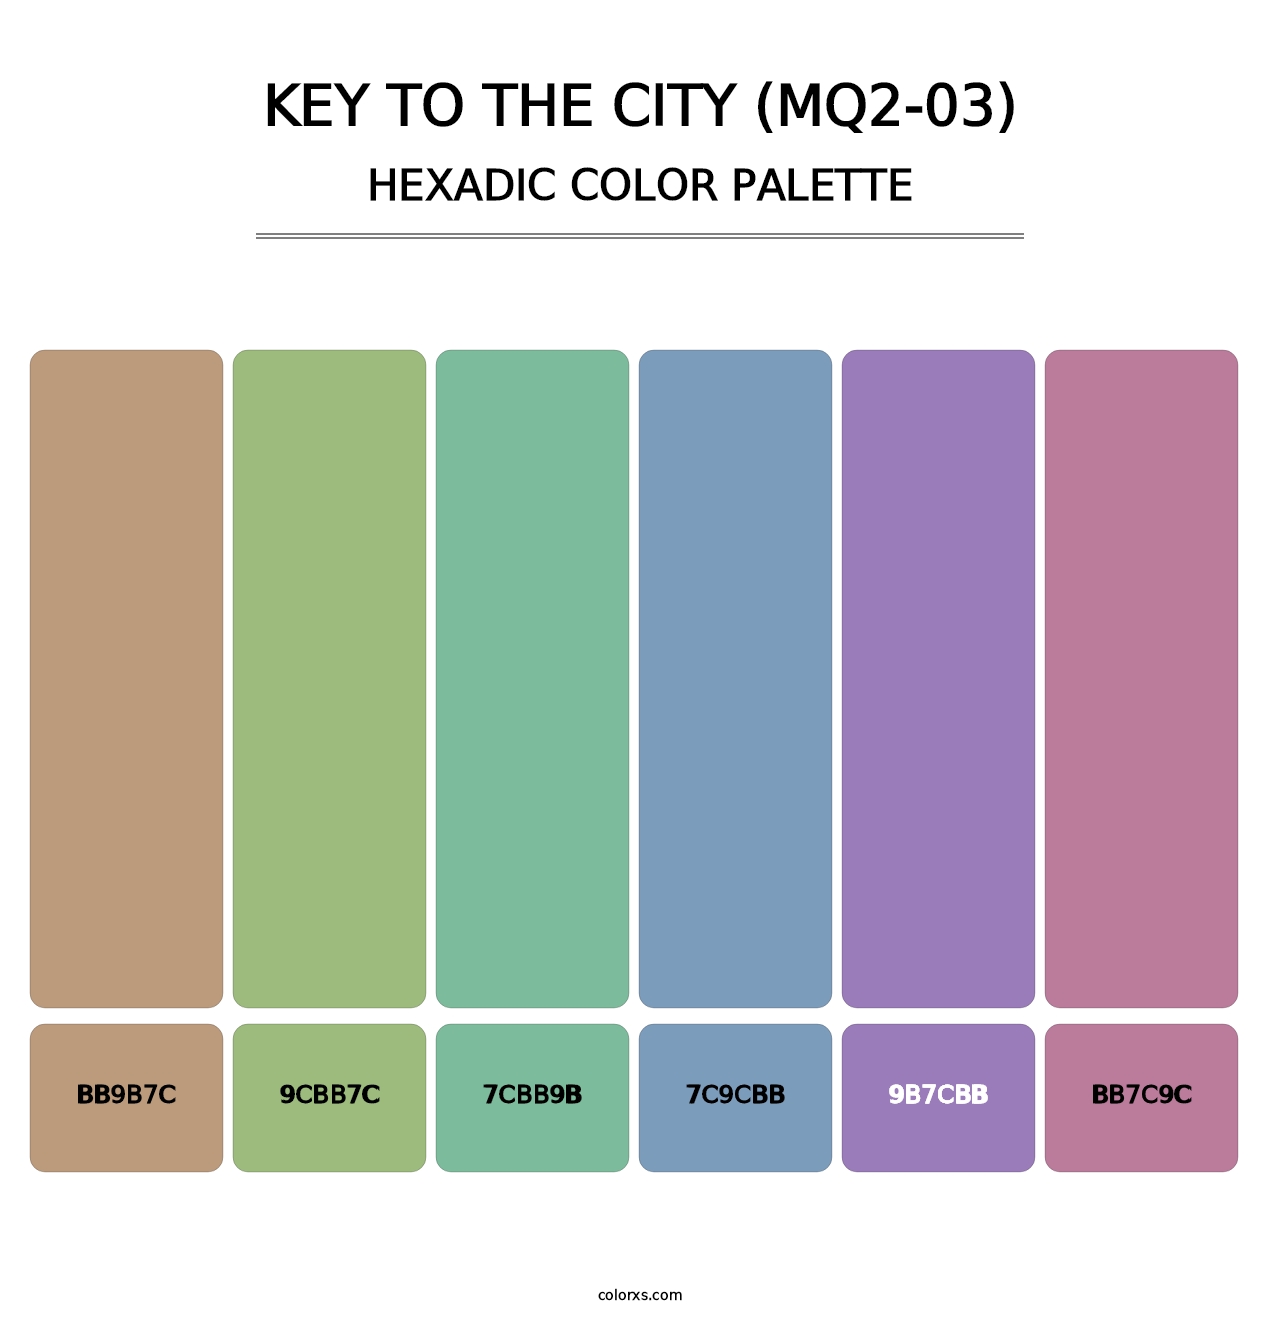 Key To The City (MQ2-03) - Hexadic Color Palette